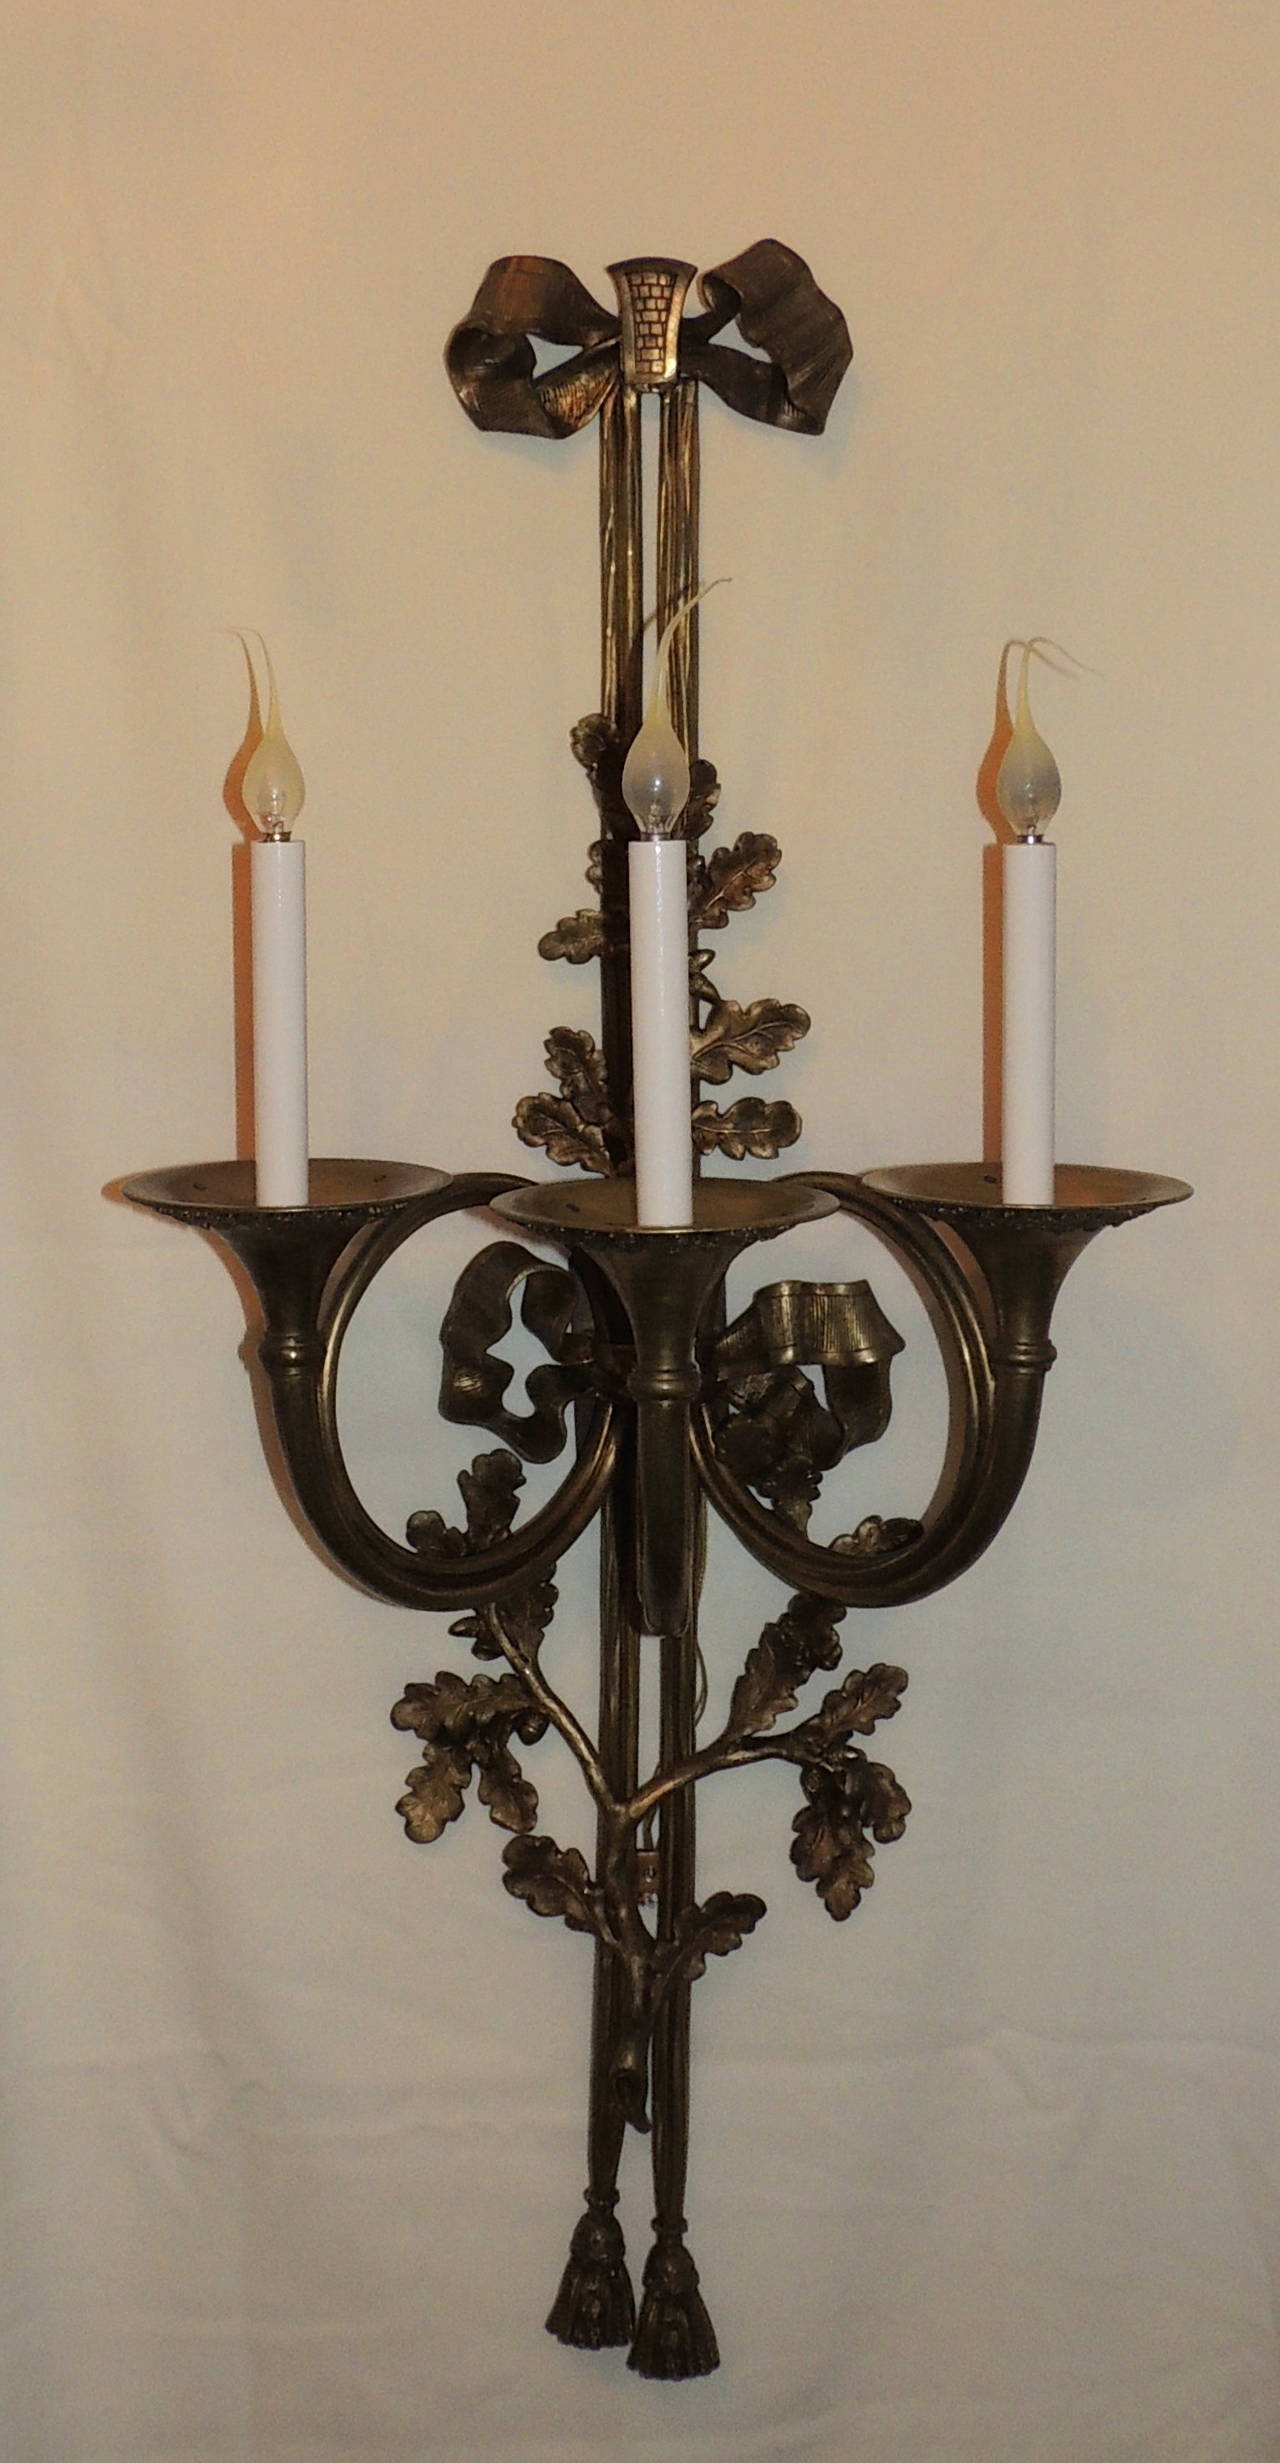 These wonderful pair of antique bronze three-arm sconces are three French horns holding the three lights. Starting at the top, these beautiful sconces are topped with a ribbon bow continuing with filigree details down the center and finished with